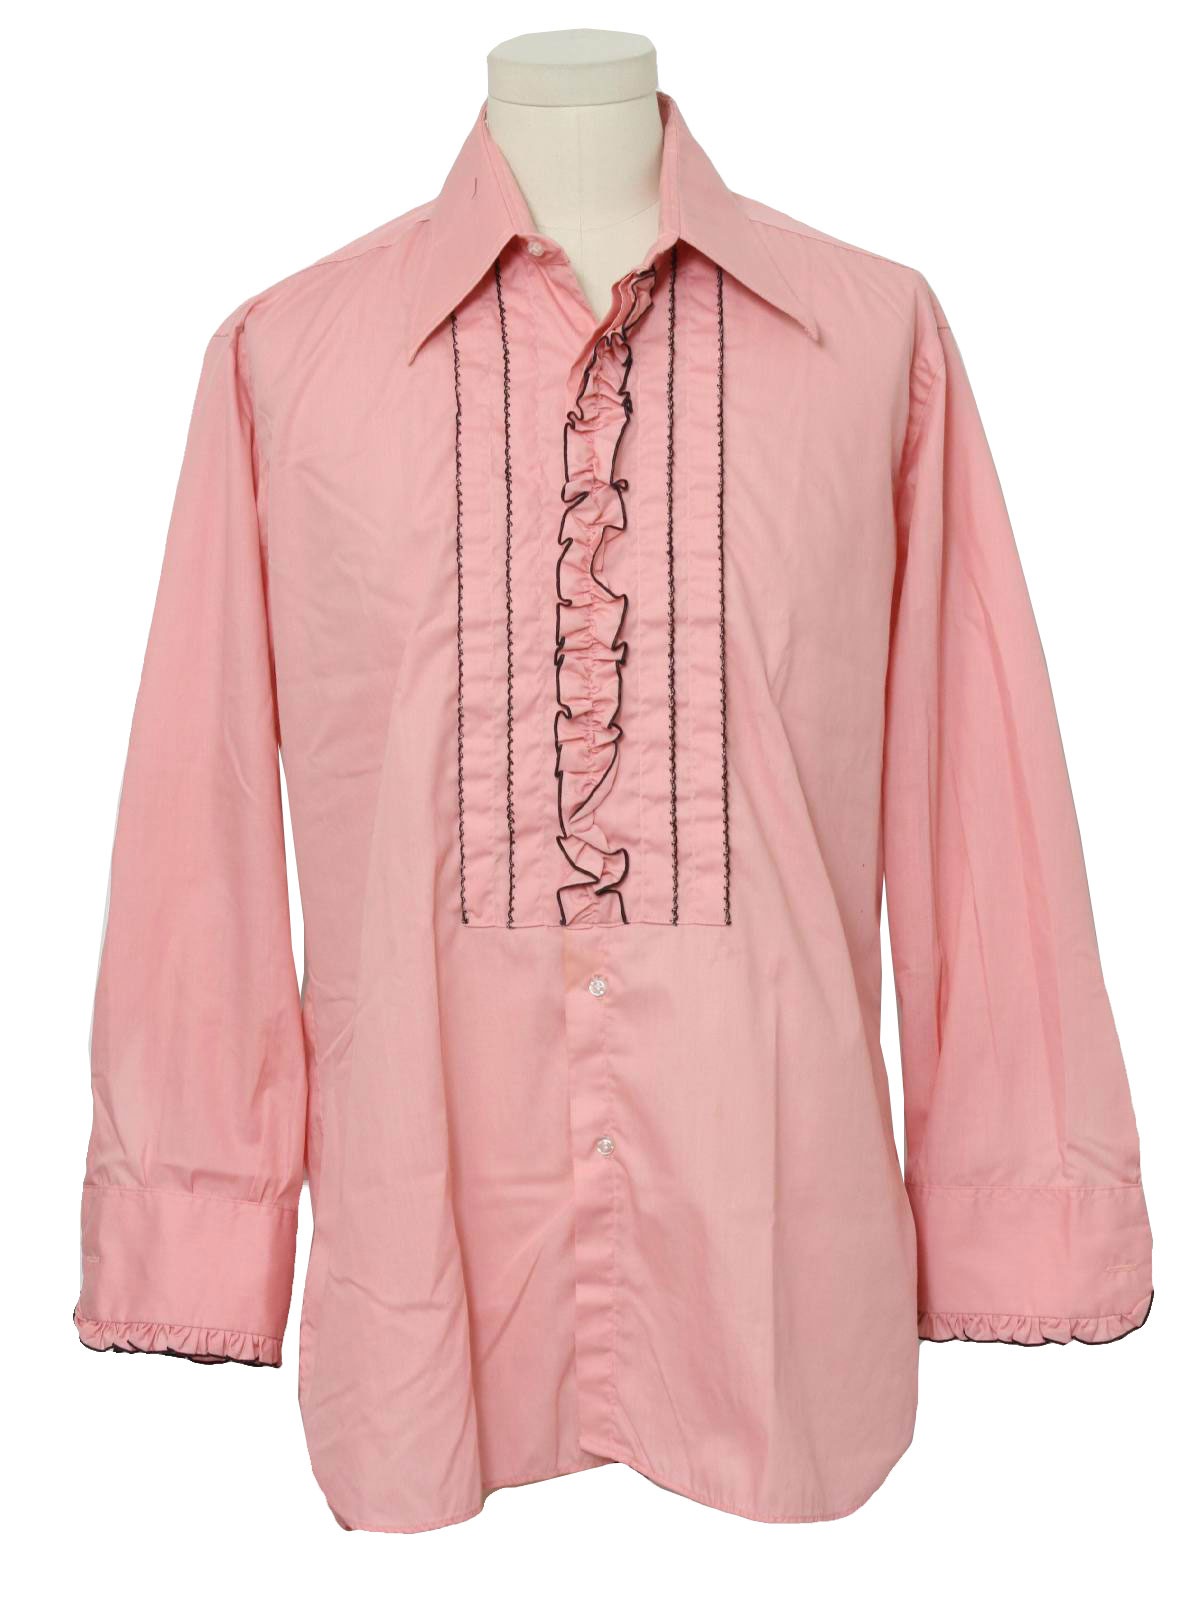 Retro 1970's Shirt (After Six) : 70s -After Six- Mens dusty rose cotton ...